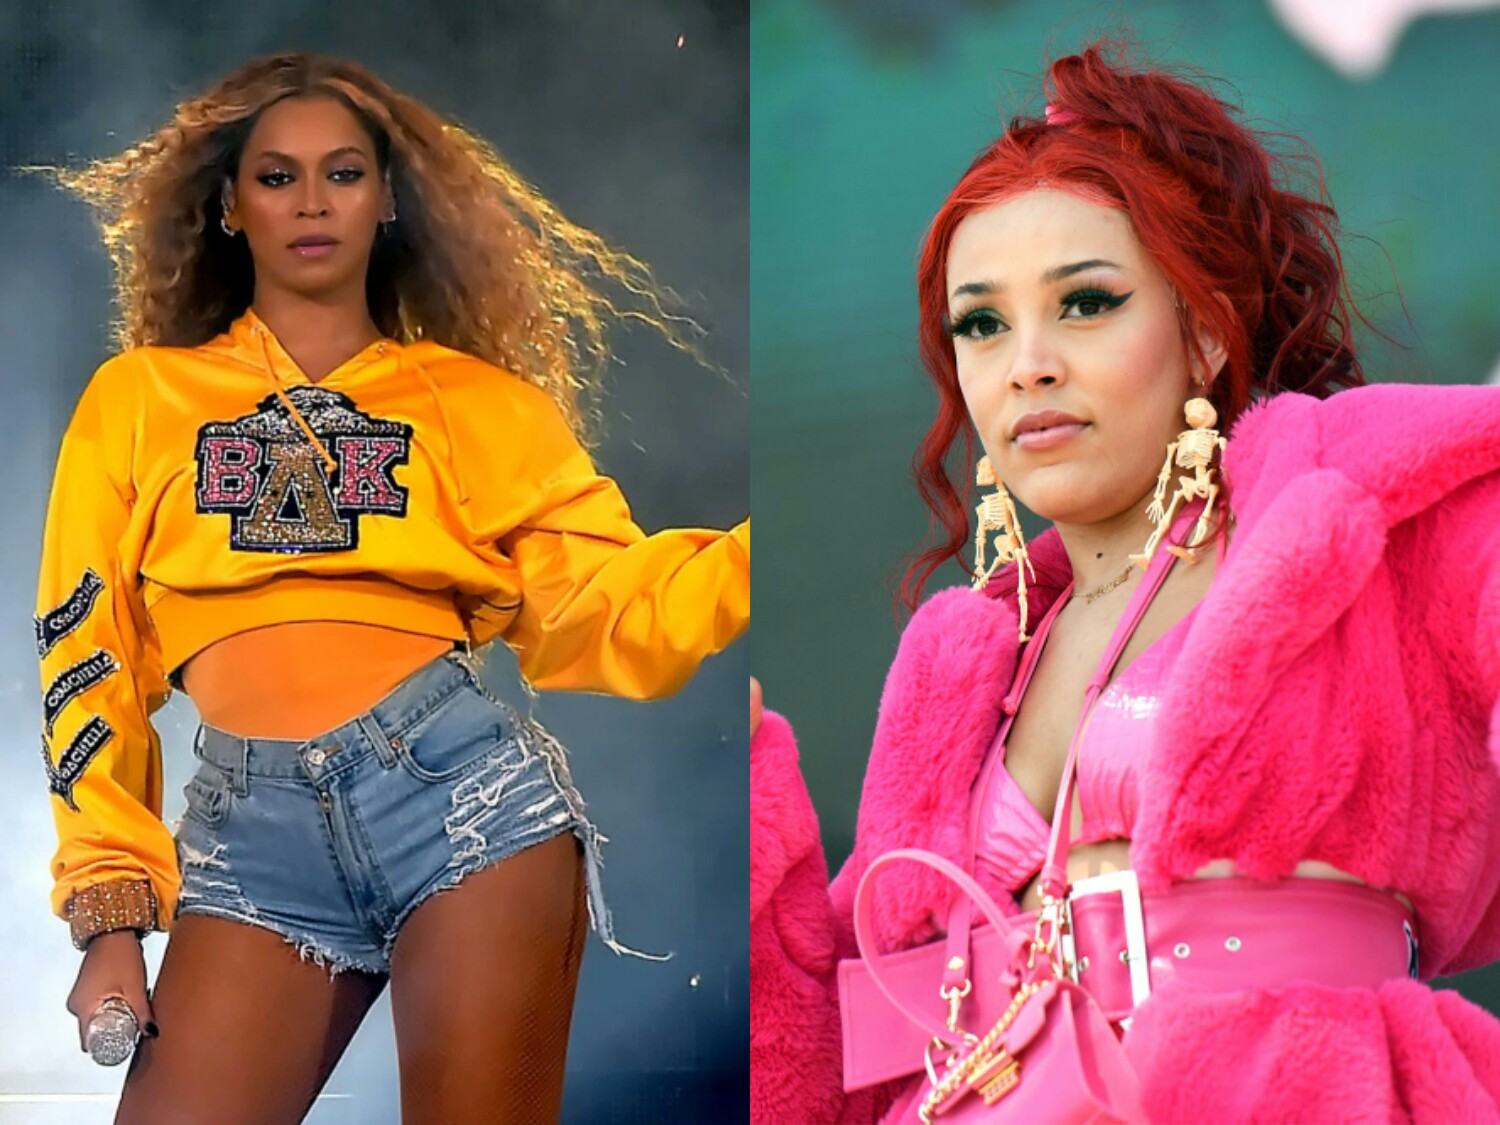 Doja Cat Called Beyonce "Beyon-Key" and Fans Perceives Racist